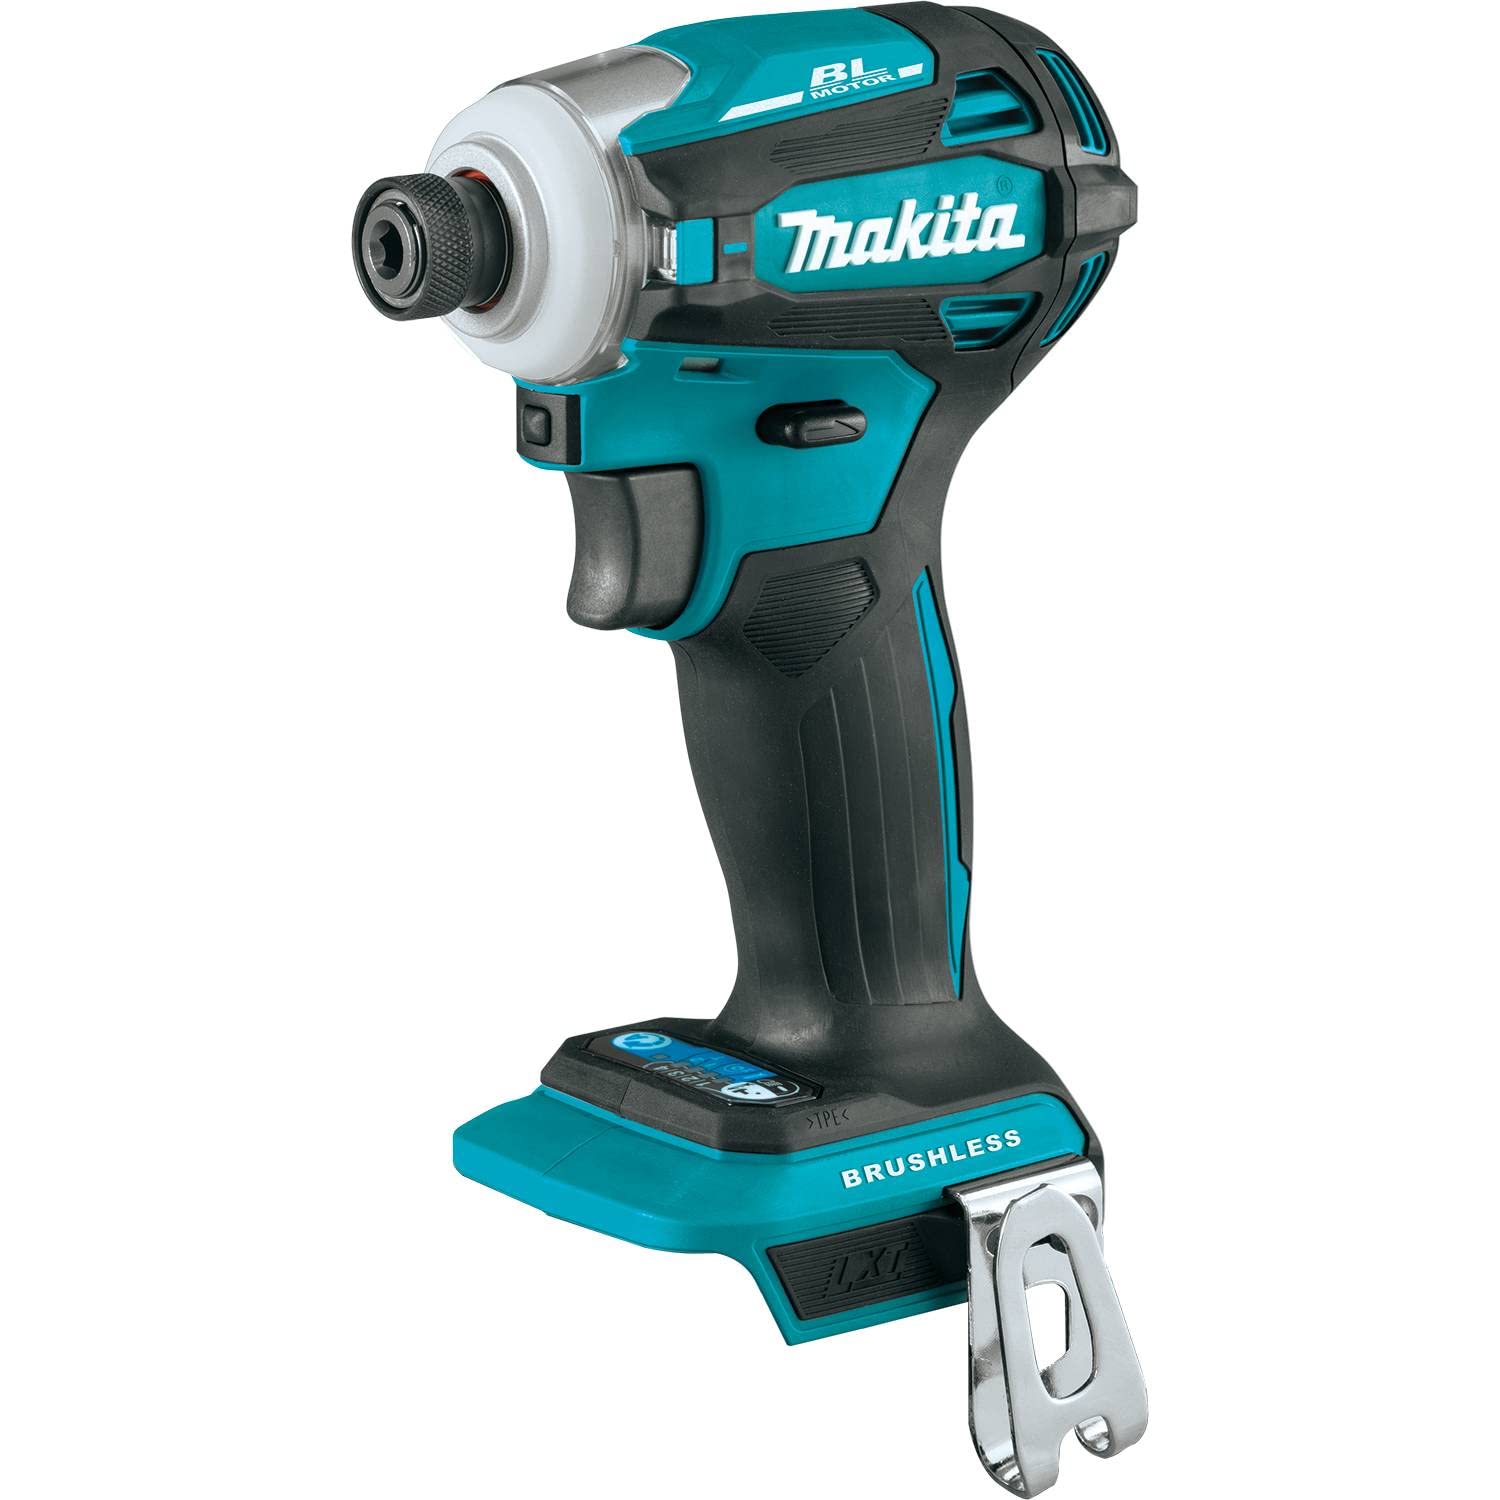 Makita XDT19Z 18V LXT® Lithium-Ion Brushless Cordless Quick-Shift Mode™ 4-Speed Impact Driver, Tool Only - $130 at Amazon